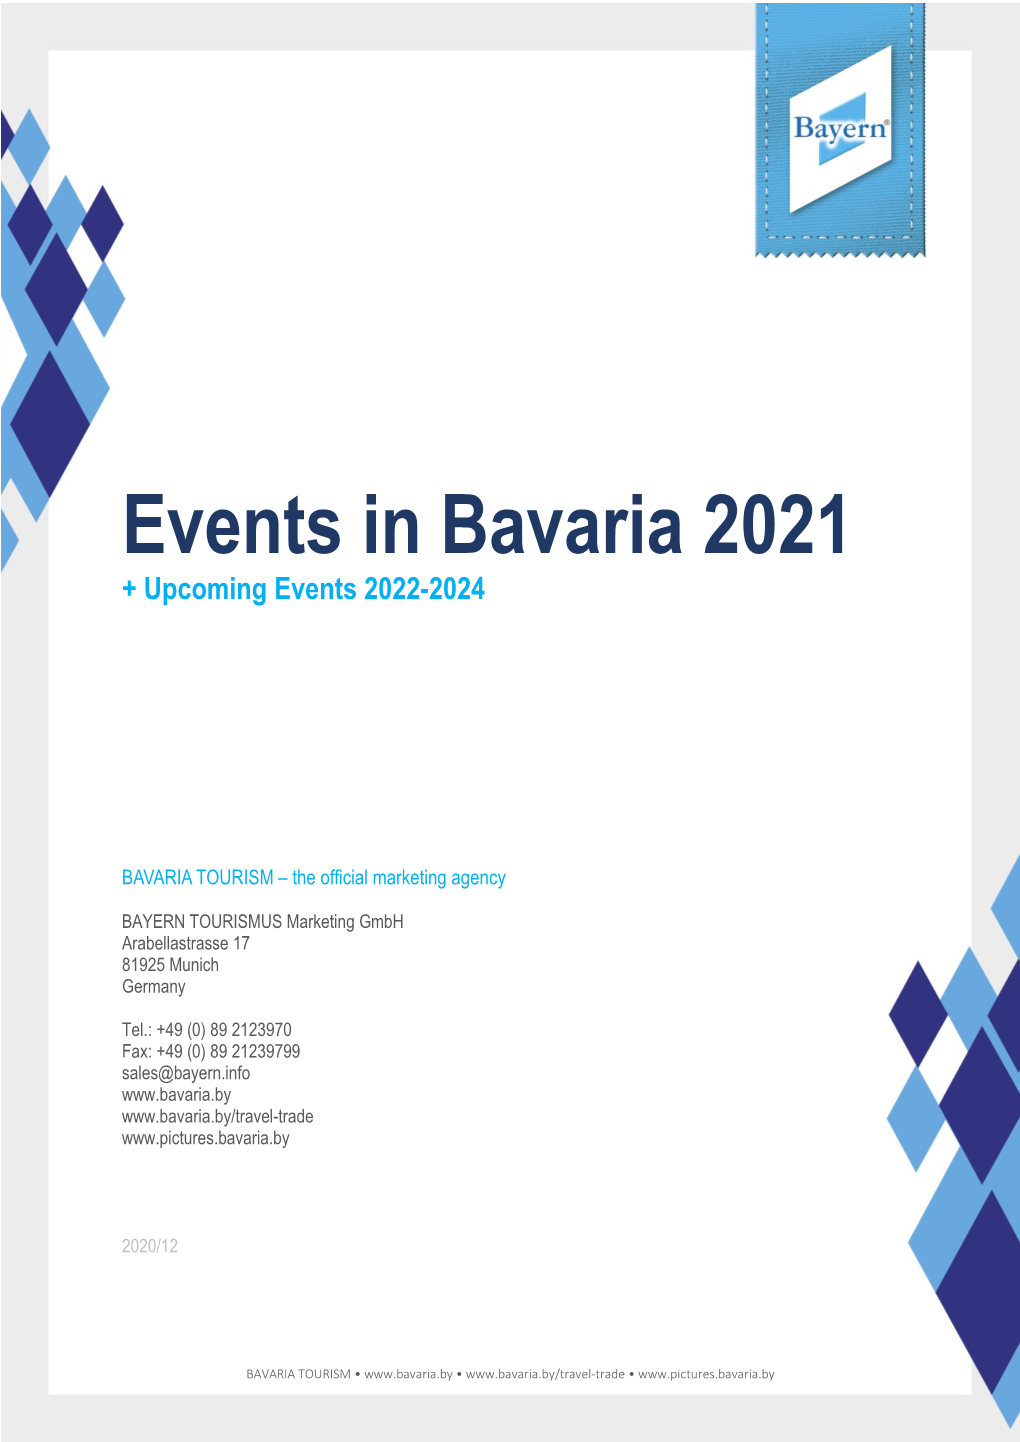 Events in Bavaria 2021 + Upcoming Events 2022-2024